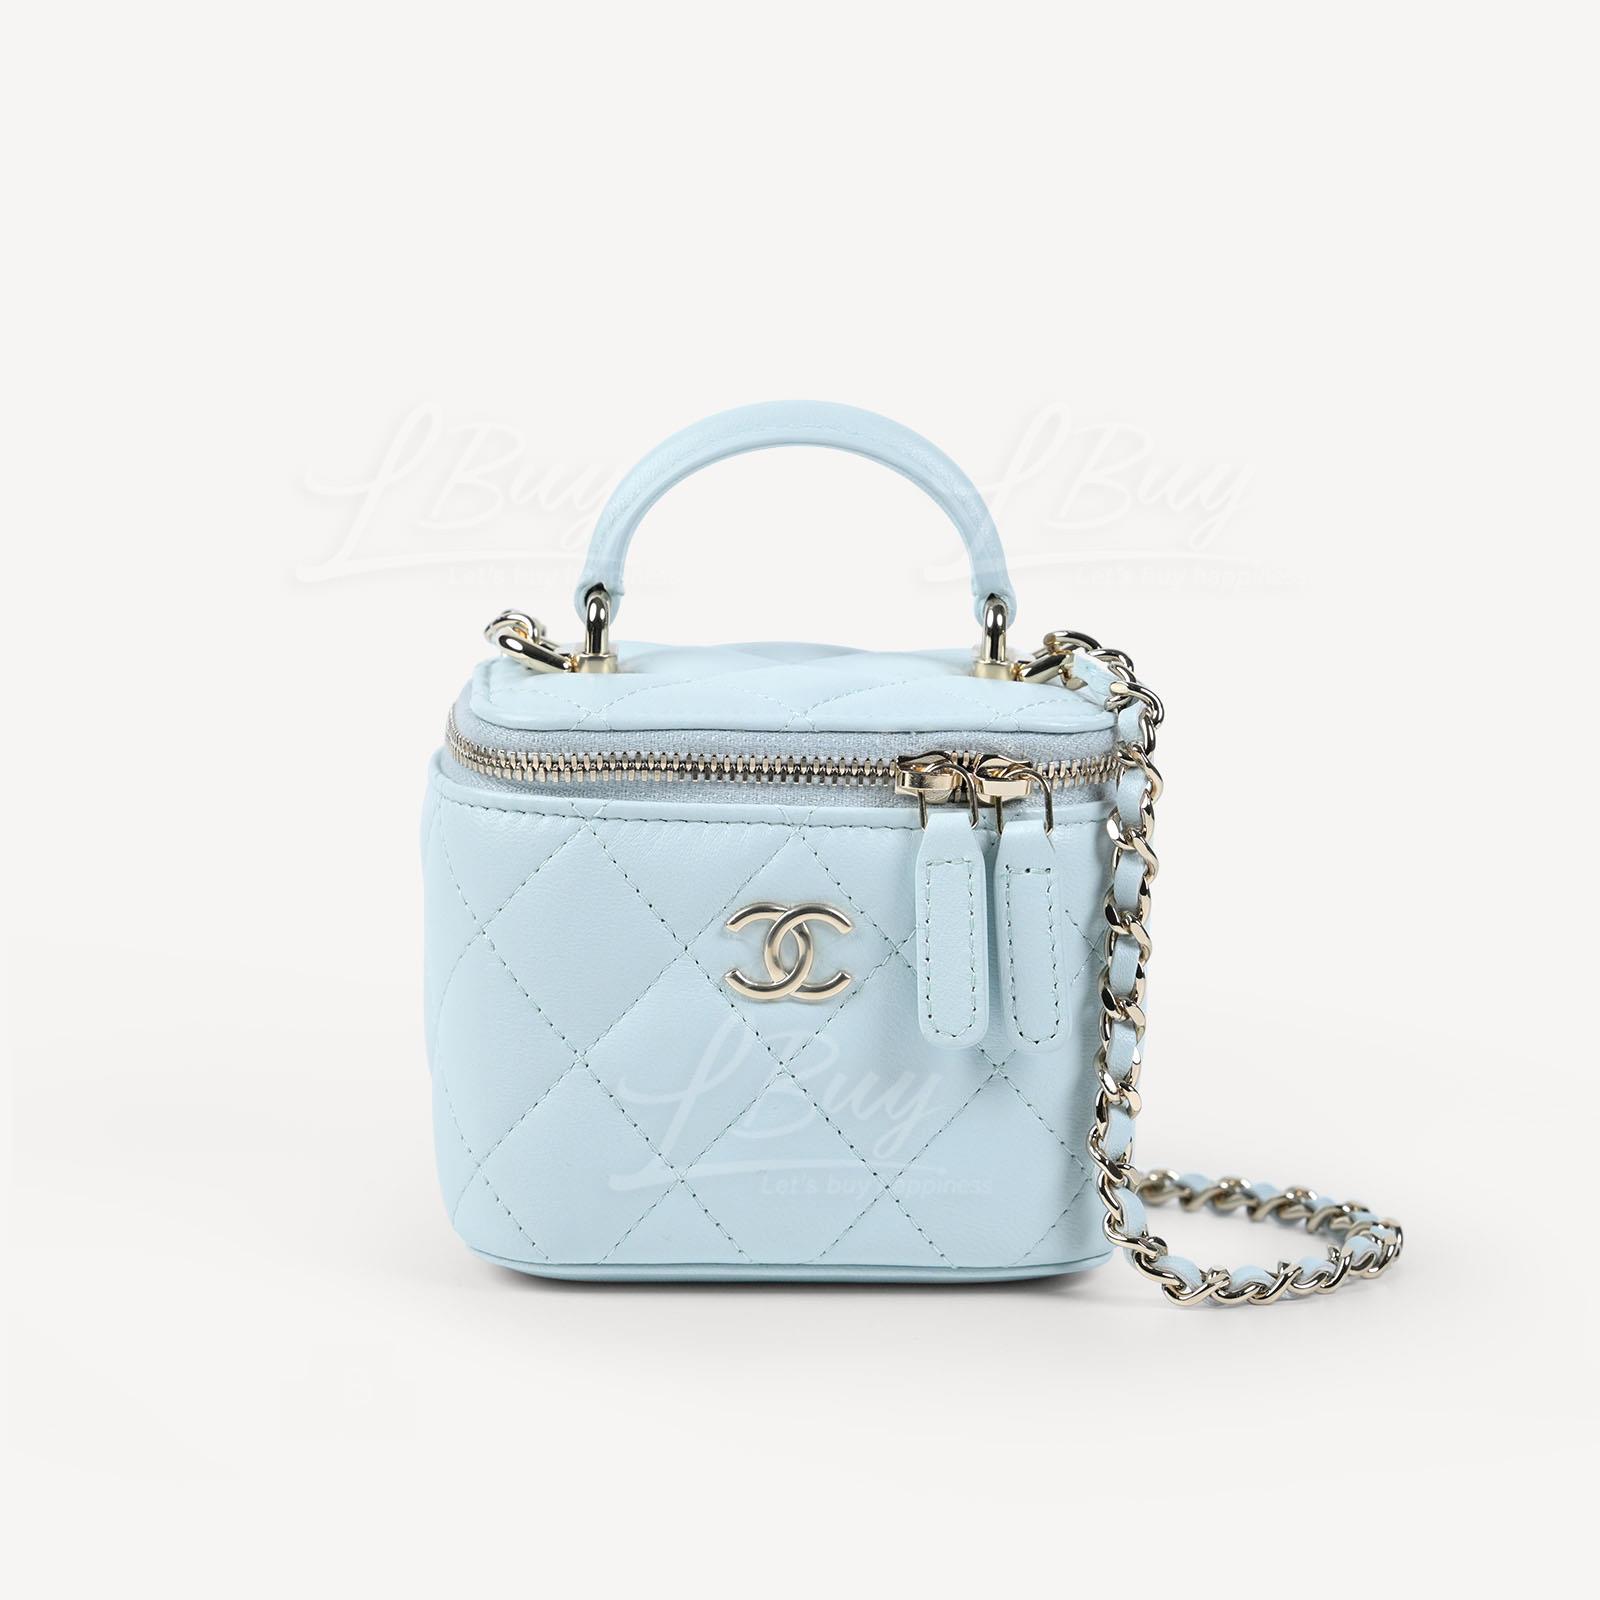 Chanel Light Blue Vanity Case with Top Handle and Chain AP2198